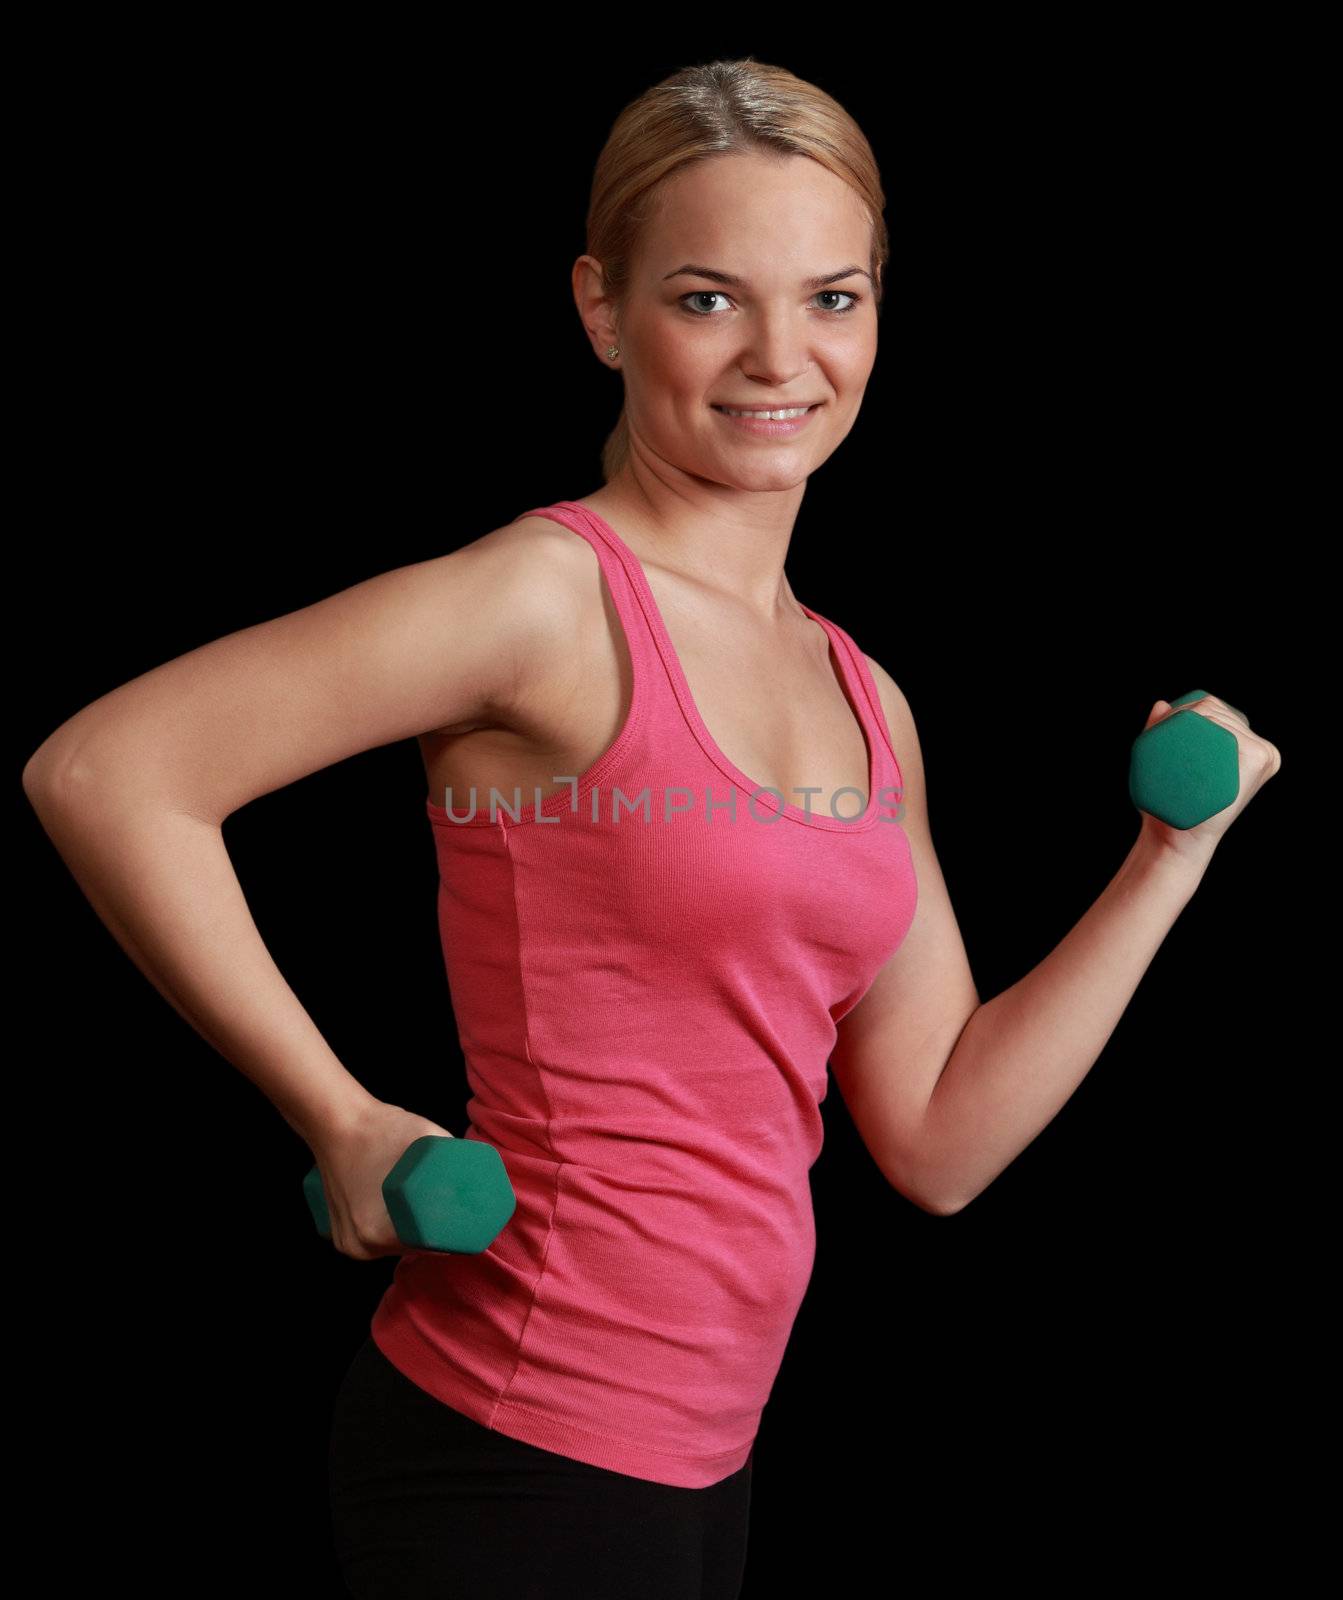 Young blonde woman doing exercise with dumbbells isolated against a black background.